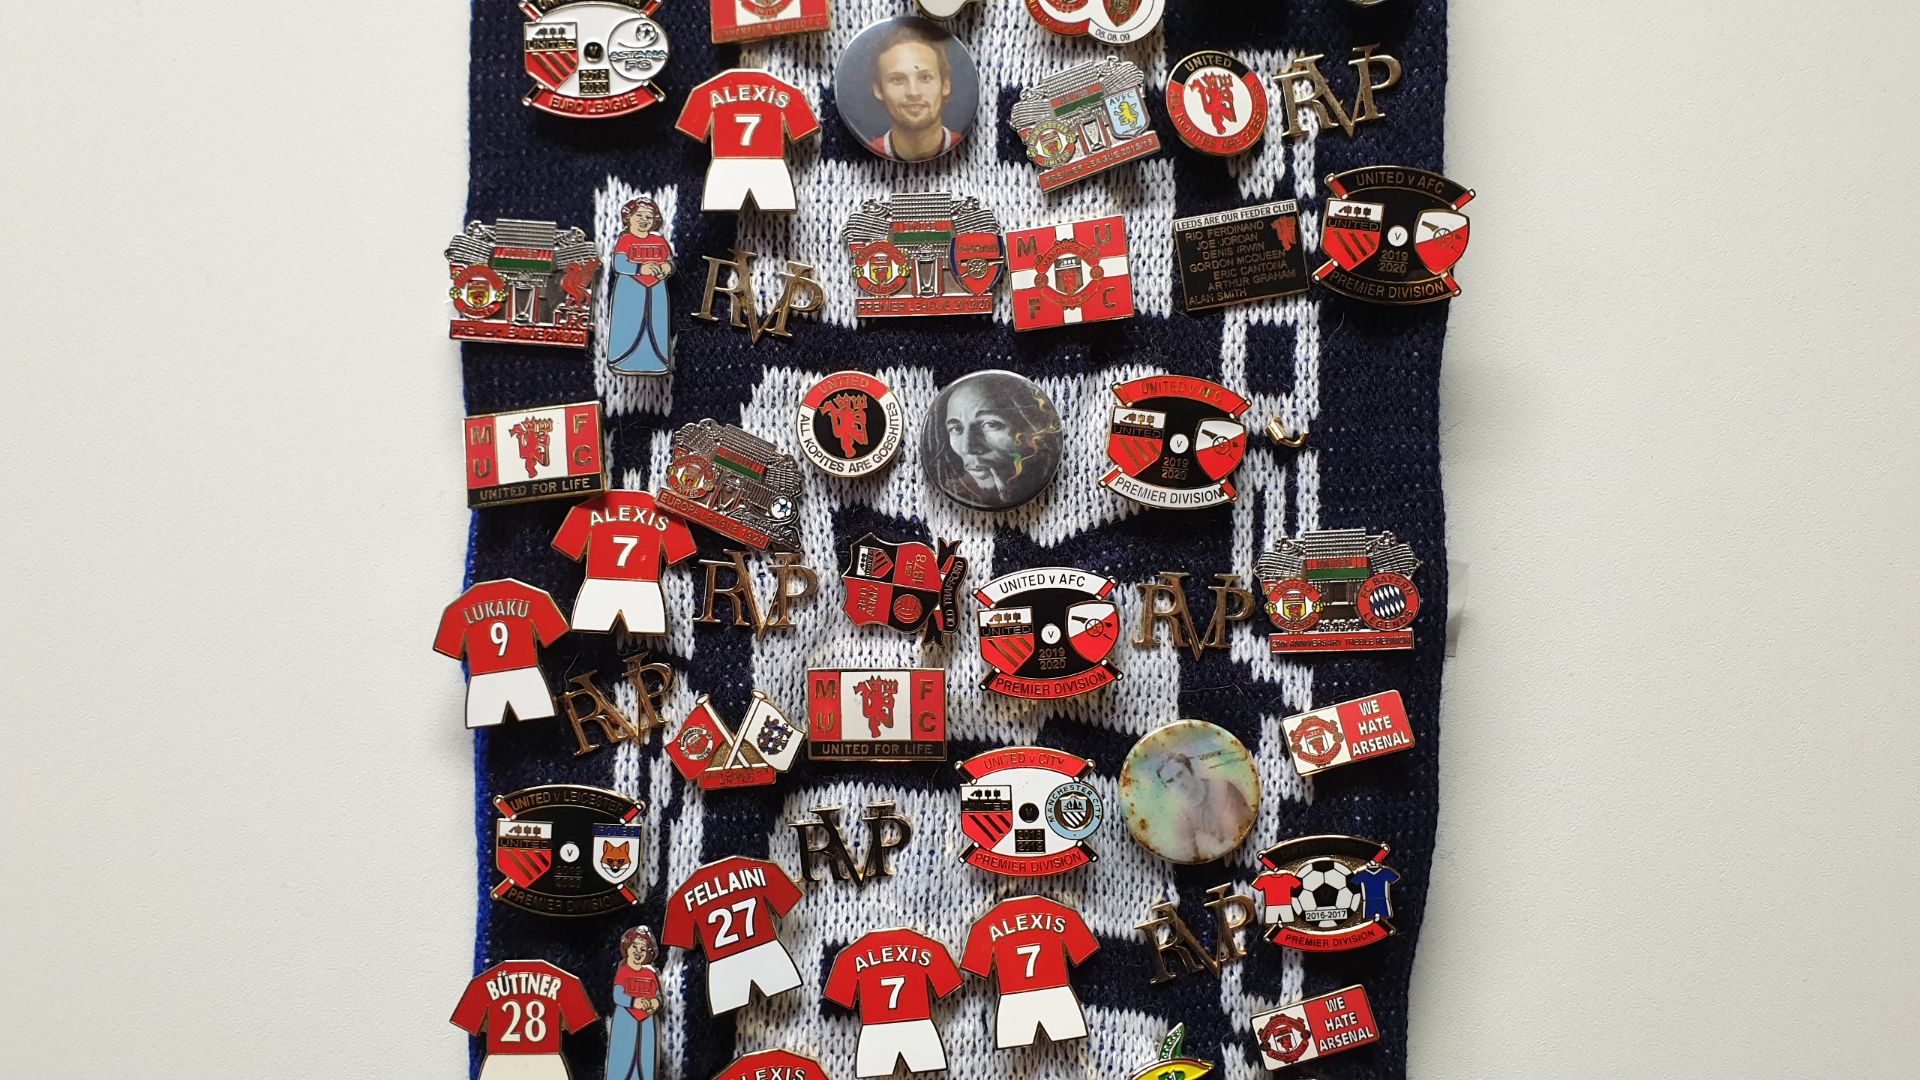 MANCHESTER UNITED SCARF CONTAINING APPROX 220 X PIN BADGES IE MUFC, OLD TRAFFORD, WE HATE CITY, EURO - Image 4 of 8